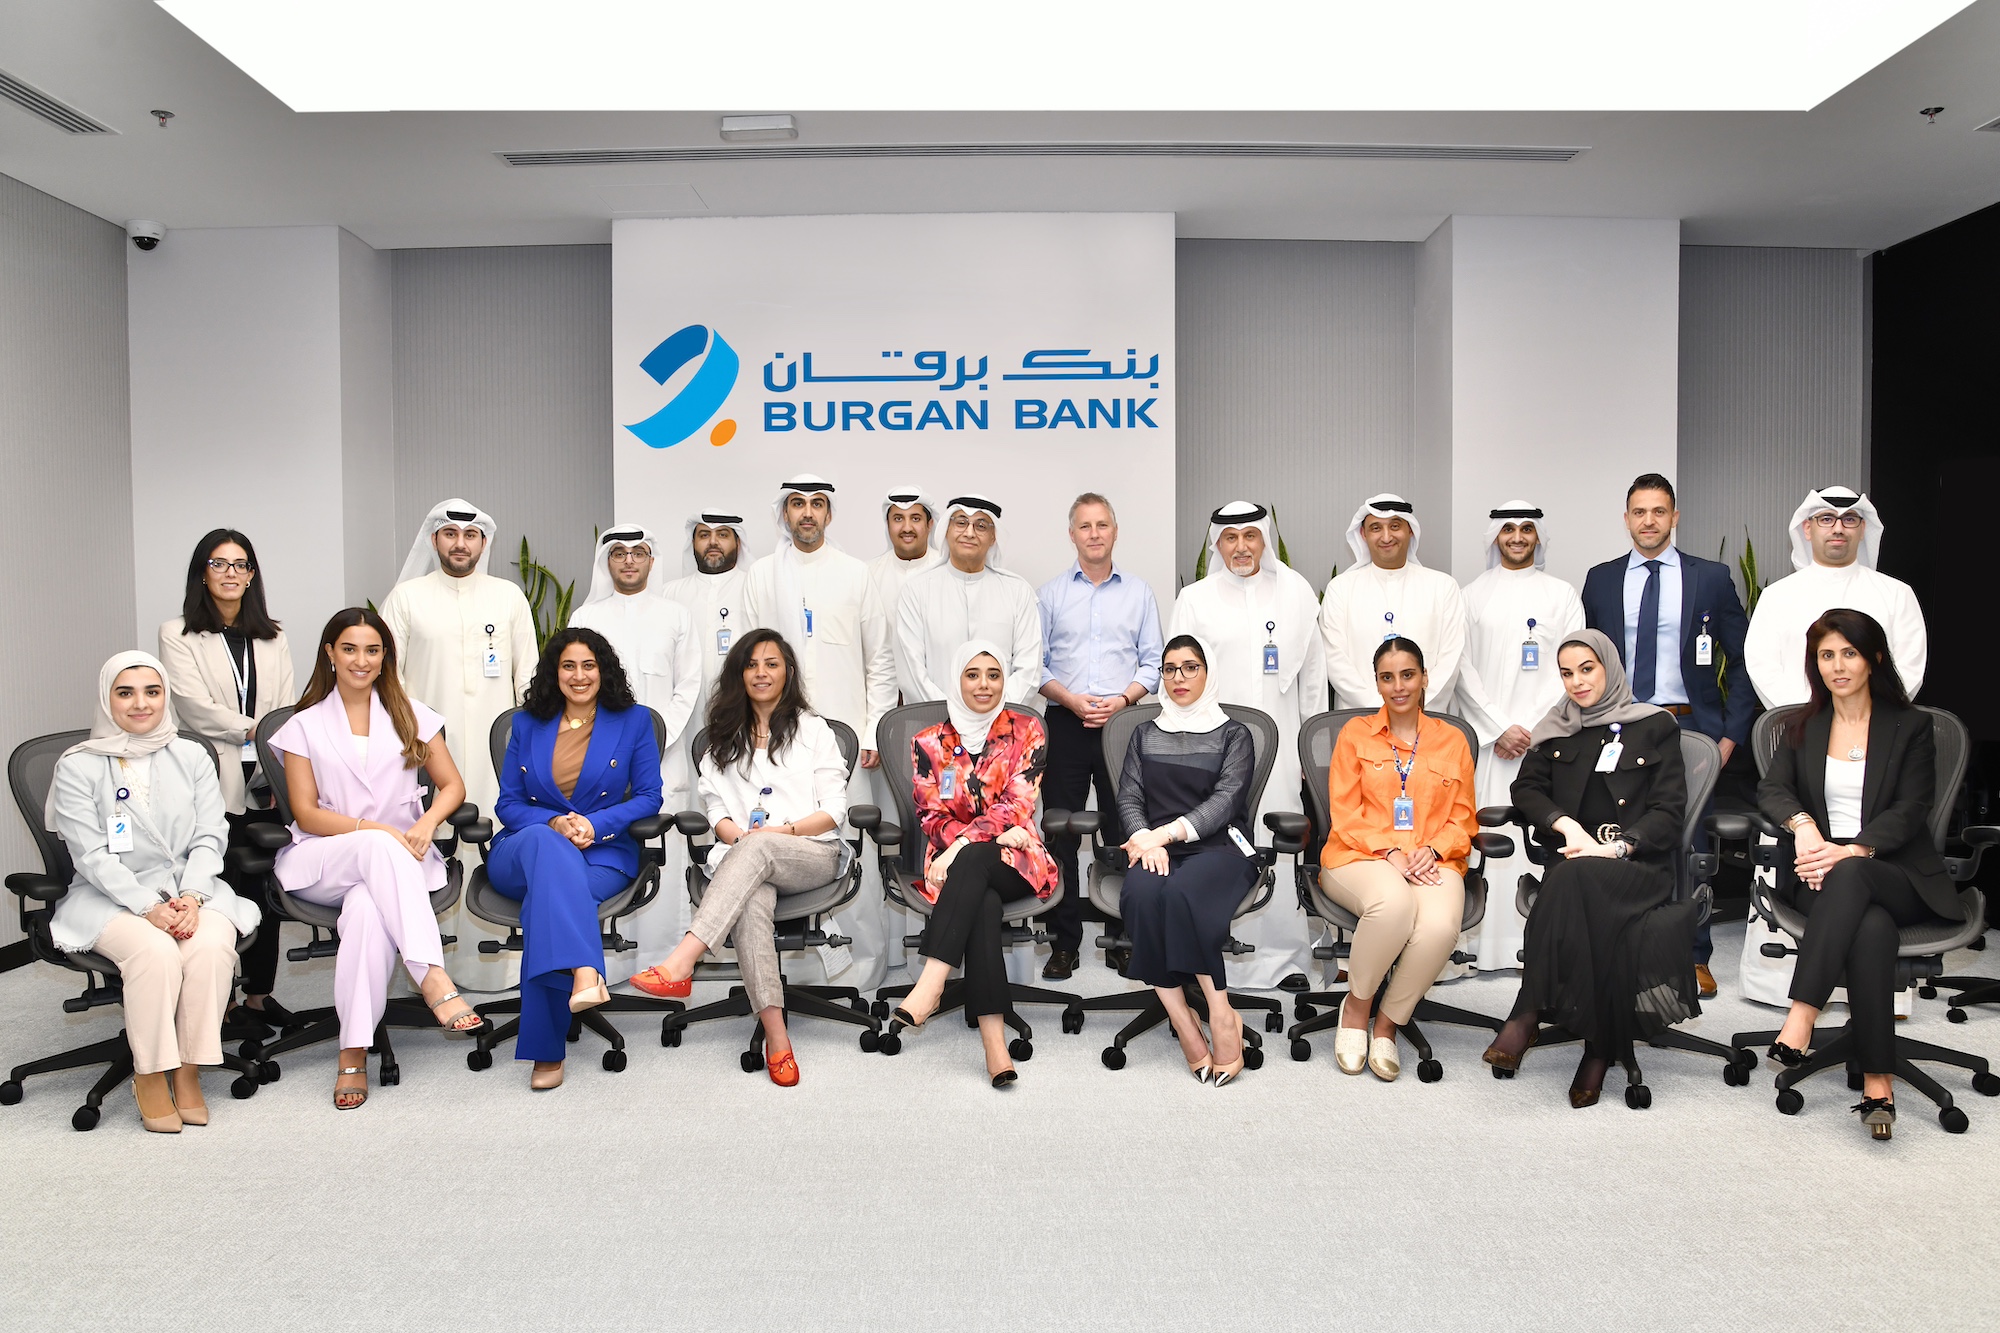 burgan bank launches its investment and wealth management academy in collaboration with fitch learning